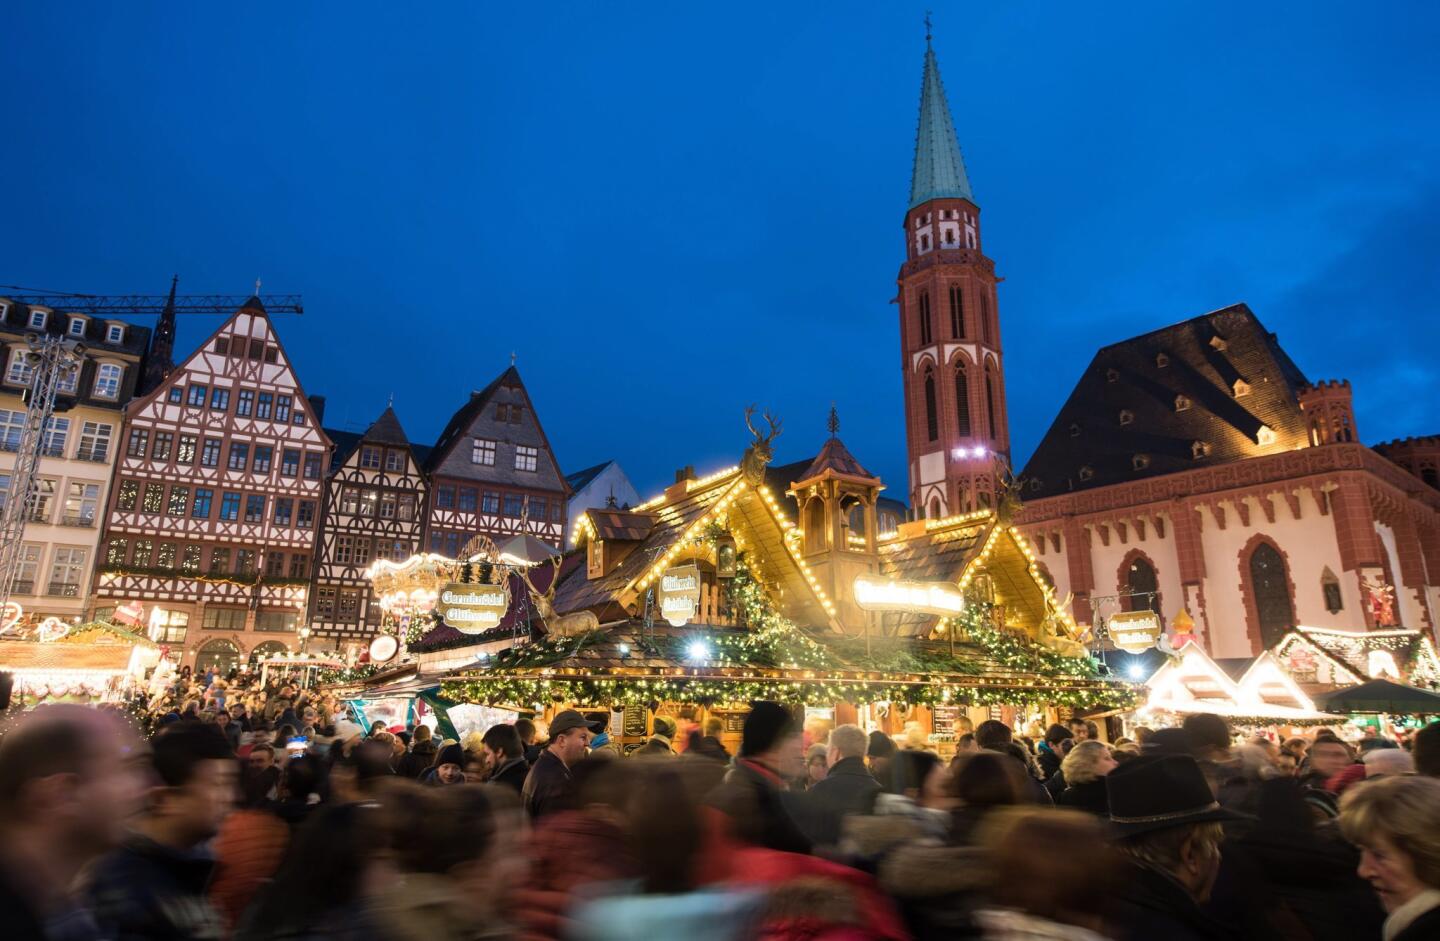 Frankfurt has innovative supper clubs, futuristic architecture, buzzy restaurants and cocktail dens that draw the city’s international crowd. December brings Christmas markets and ice skating that are rinks open to the public, and the city’s famous apple wine is served at every corner.